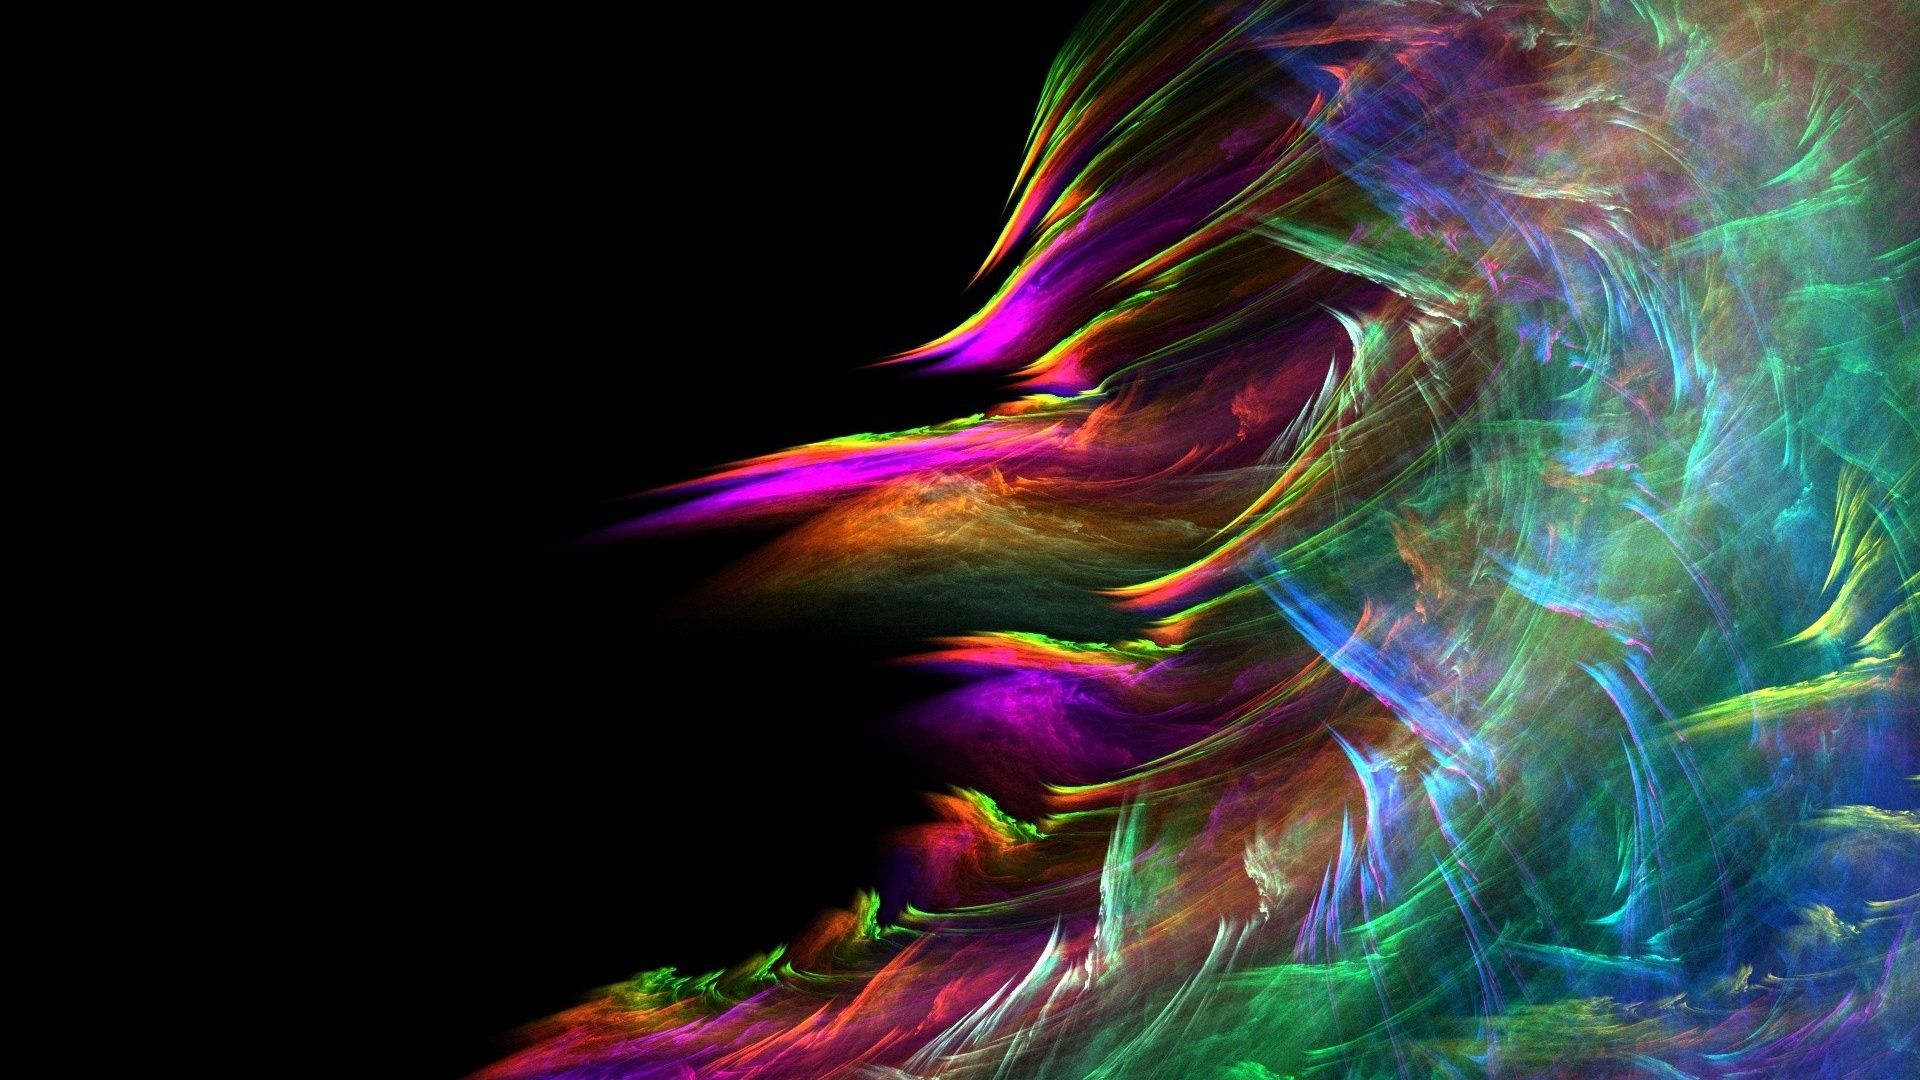 Colorful Wave Fractal Art Wallpapers